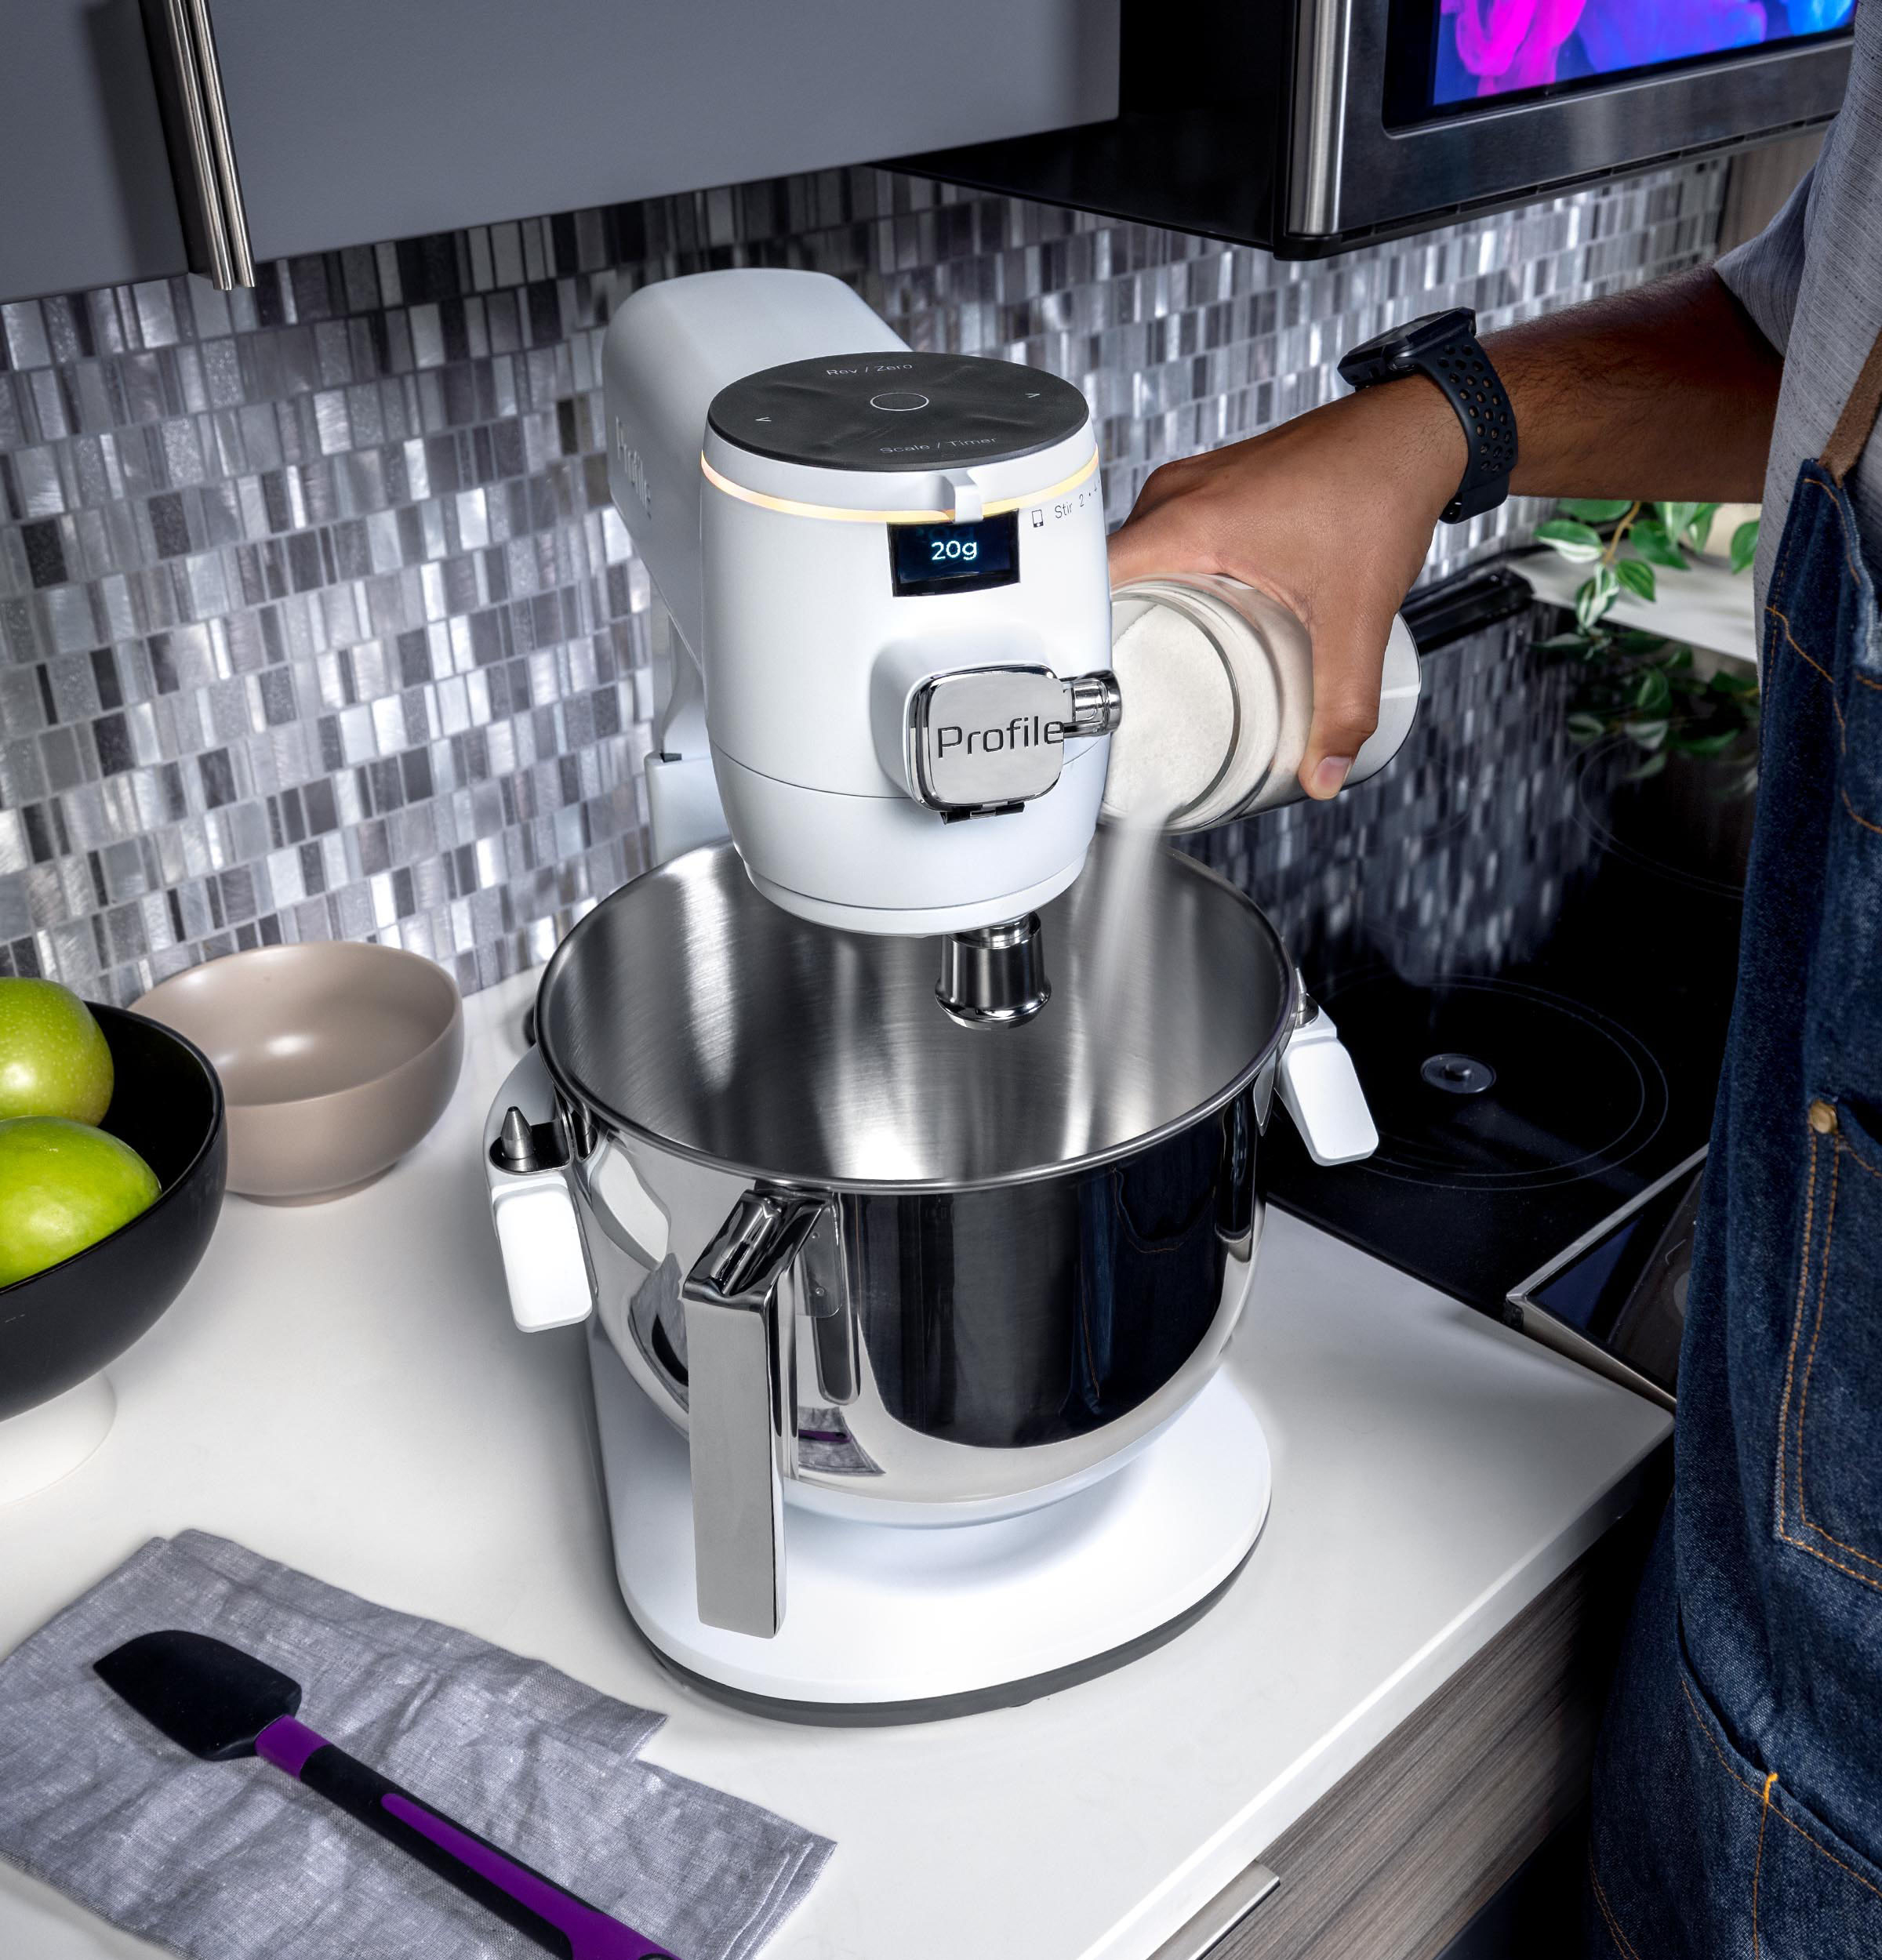 The GE Profile Smart Mixer with Auto Sense and built-in smart